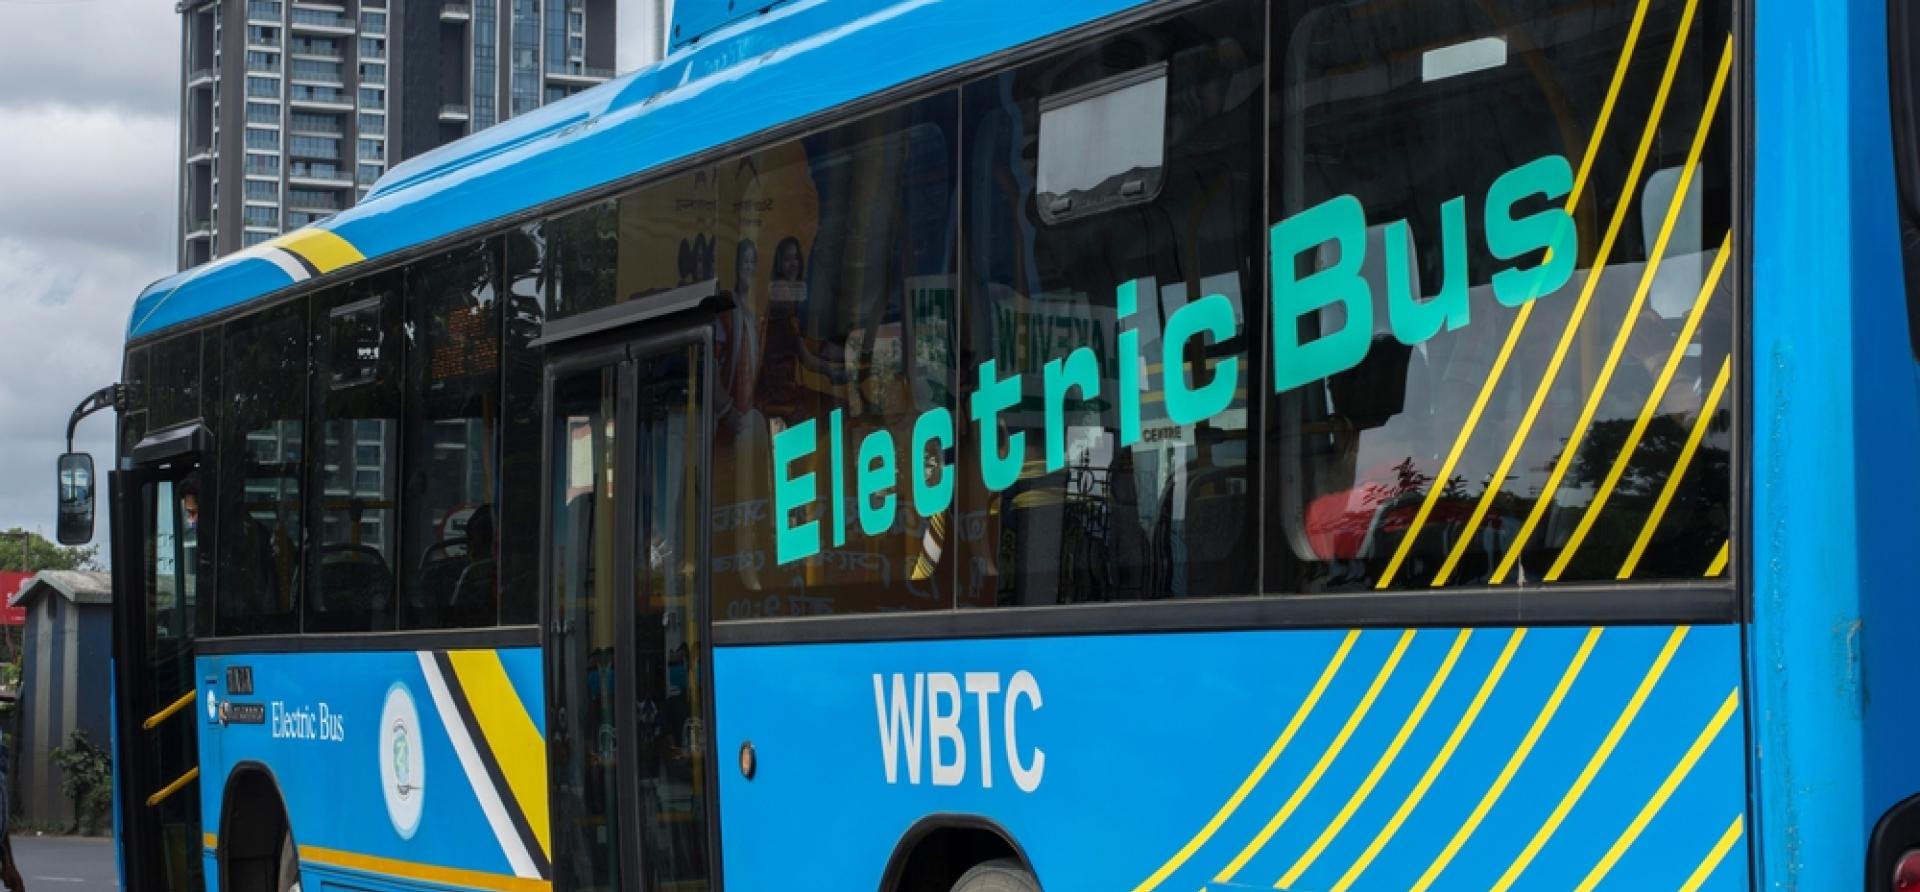 Electric Bus Adoption in India - Impacts and Investor Takeaways